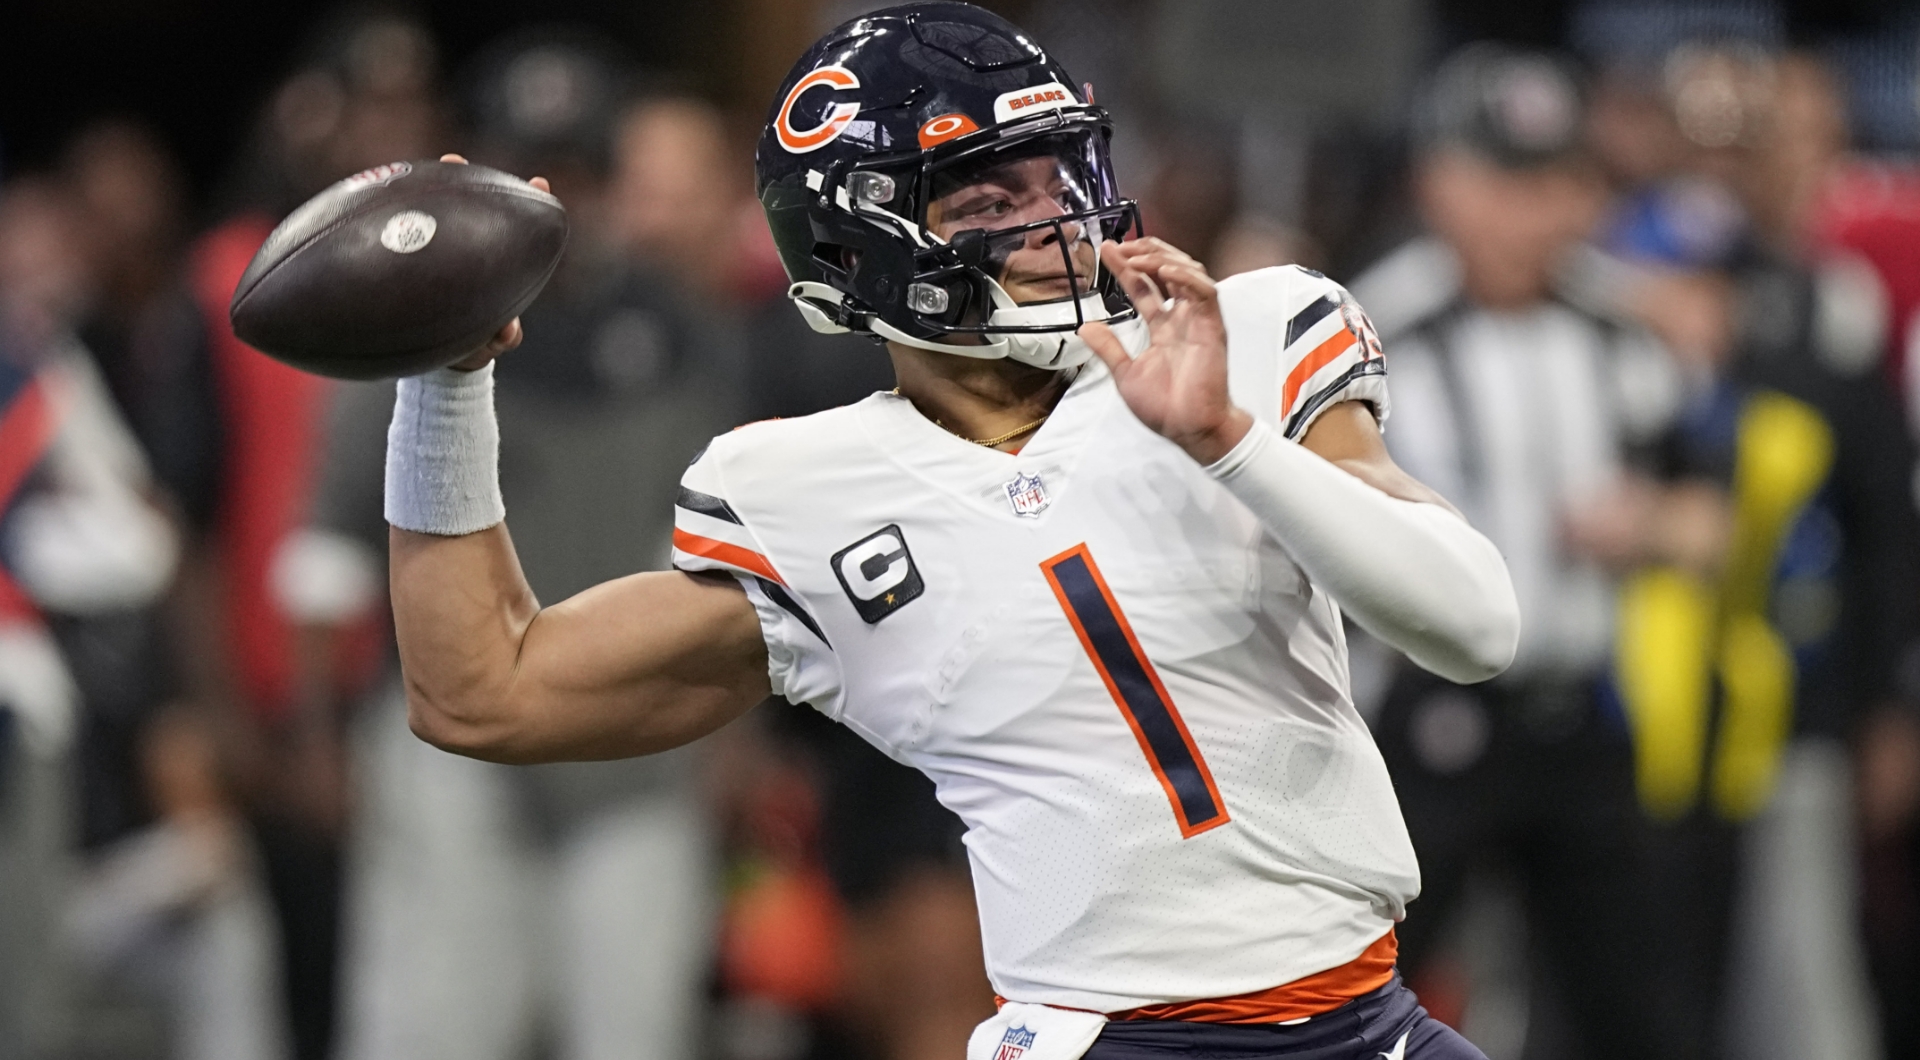 See our Bears vs Jets picks and odds